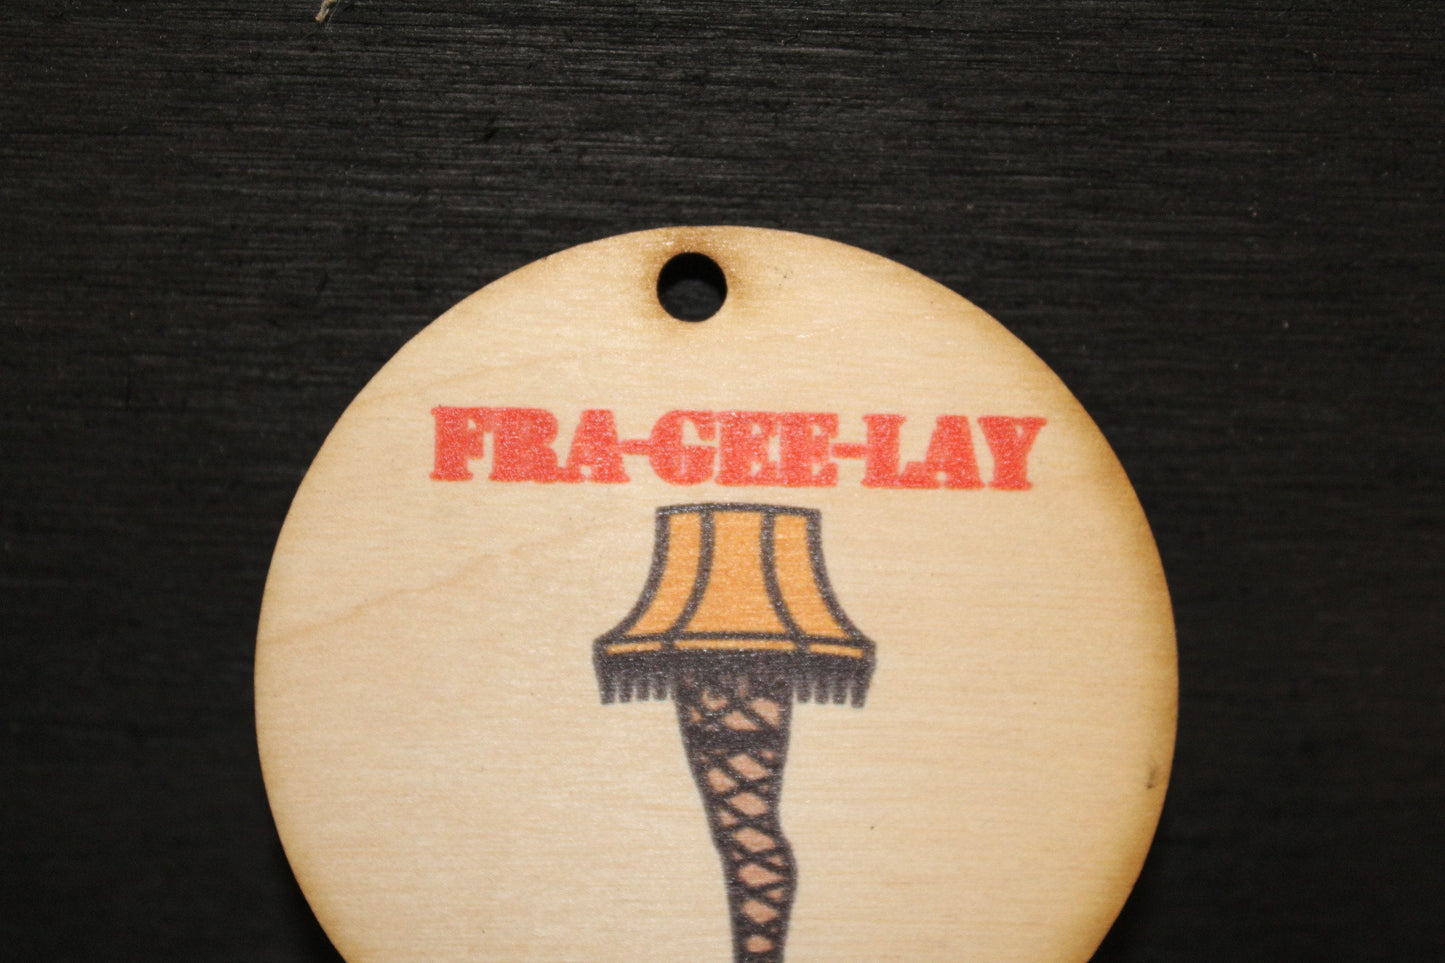 Fragile Leg Lamp Wood Slice UV Printed Wooden Christmas Ornament 3 Inch Round Circle Tree Vintage Movie Fra Gee Lay